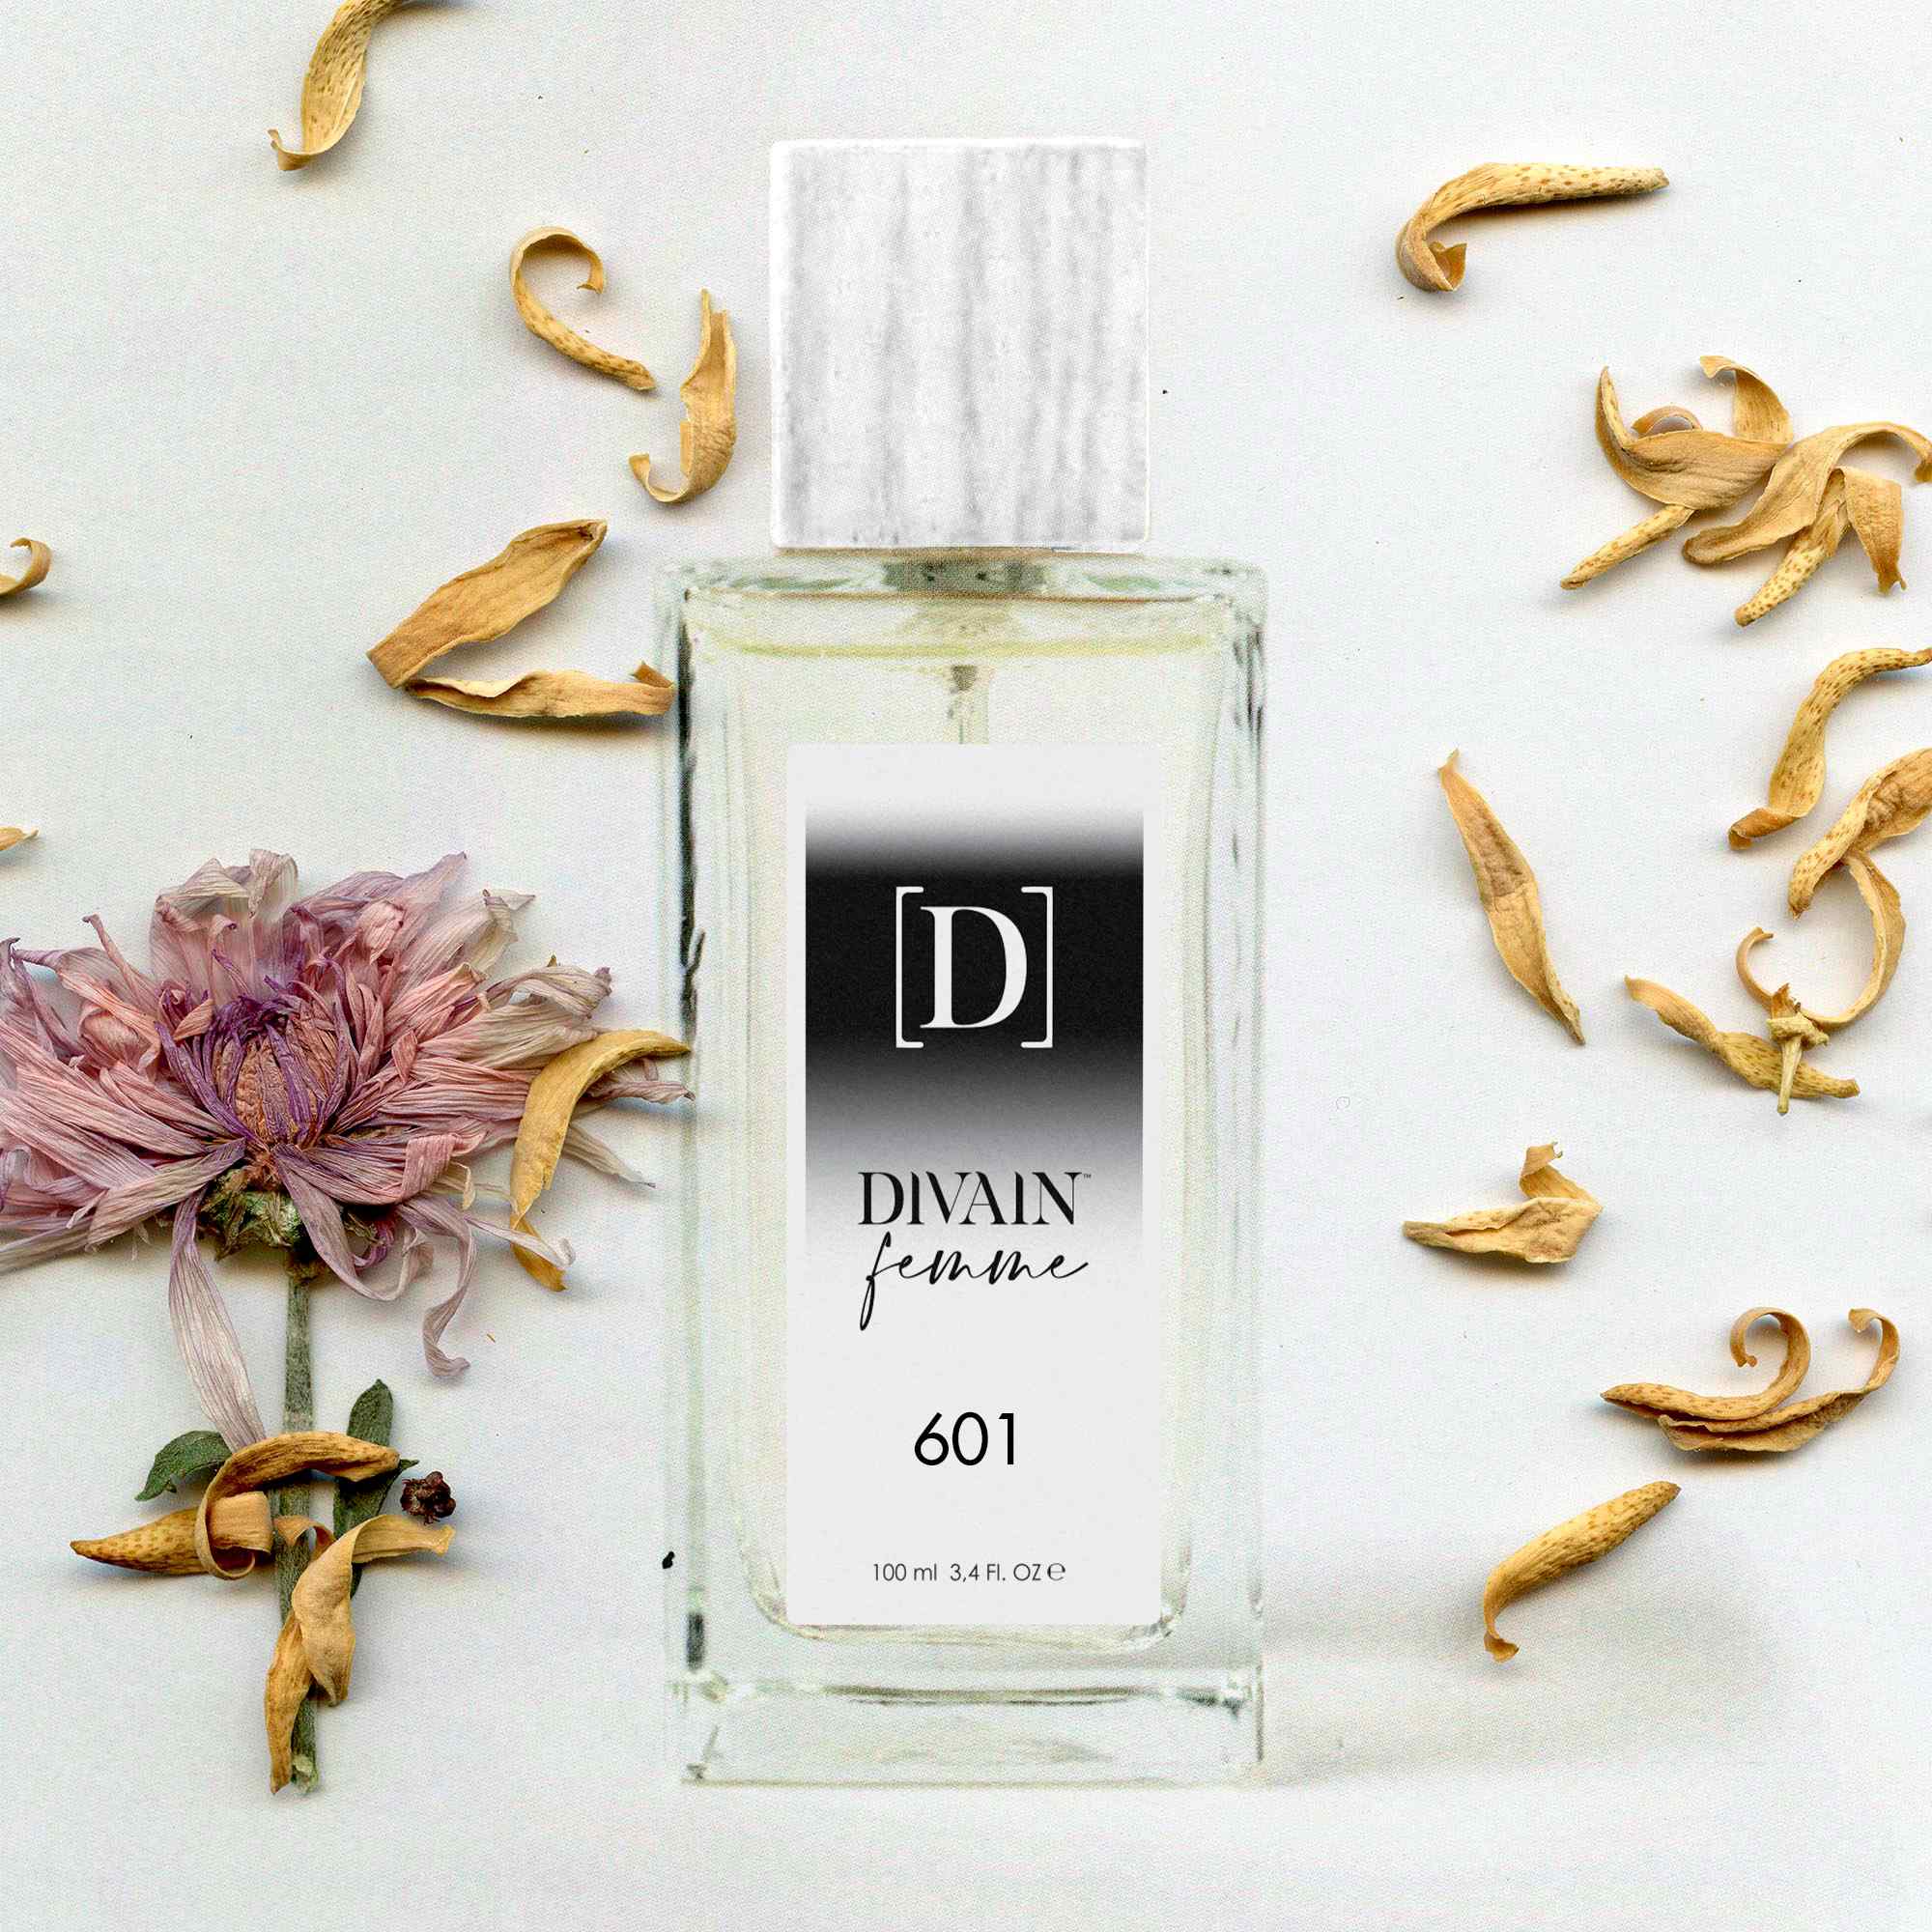 Discover the best imitation spring perfumes for women